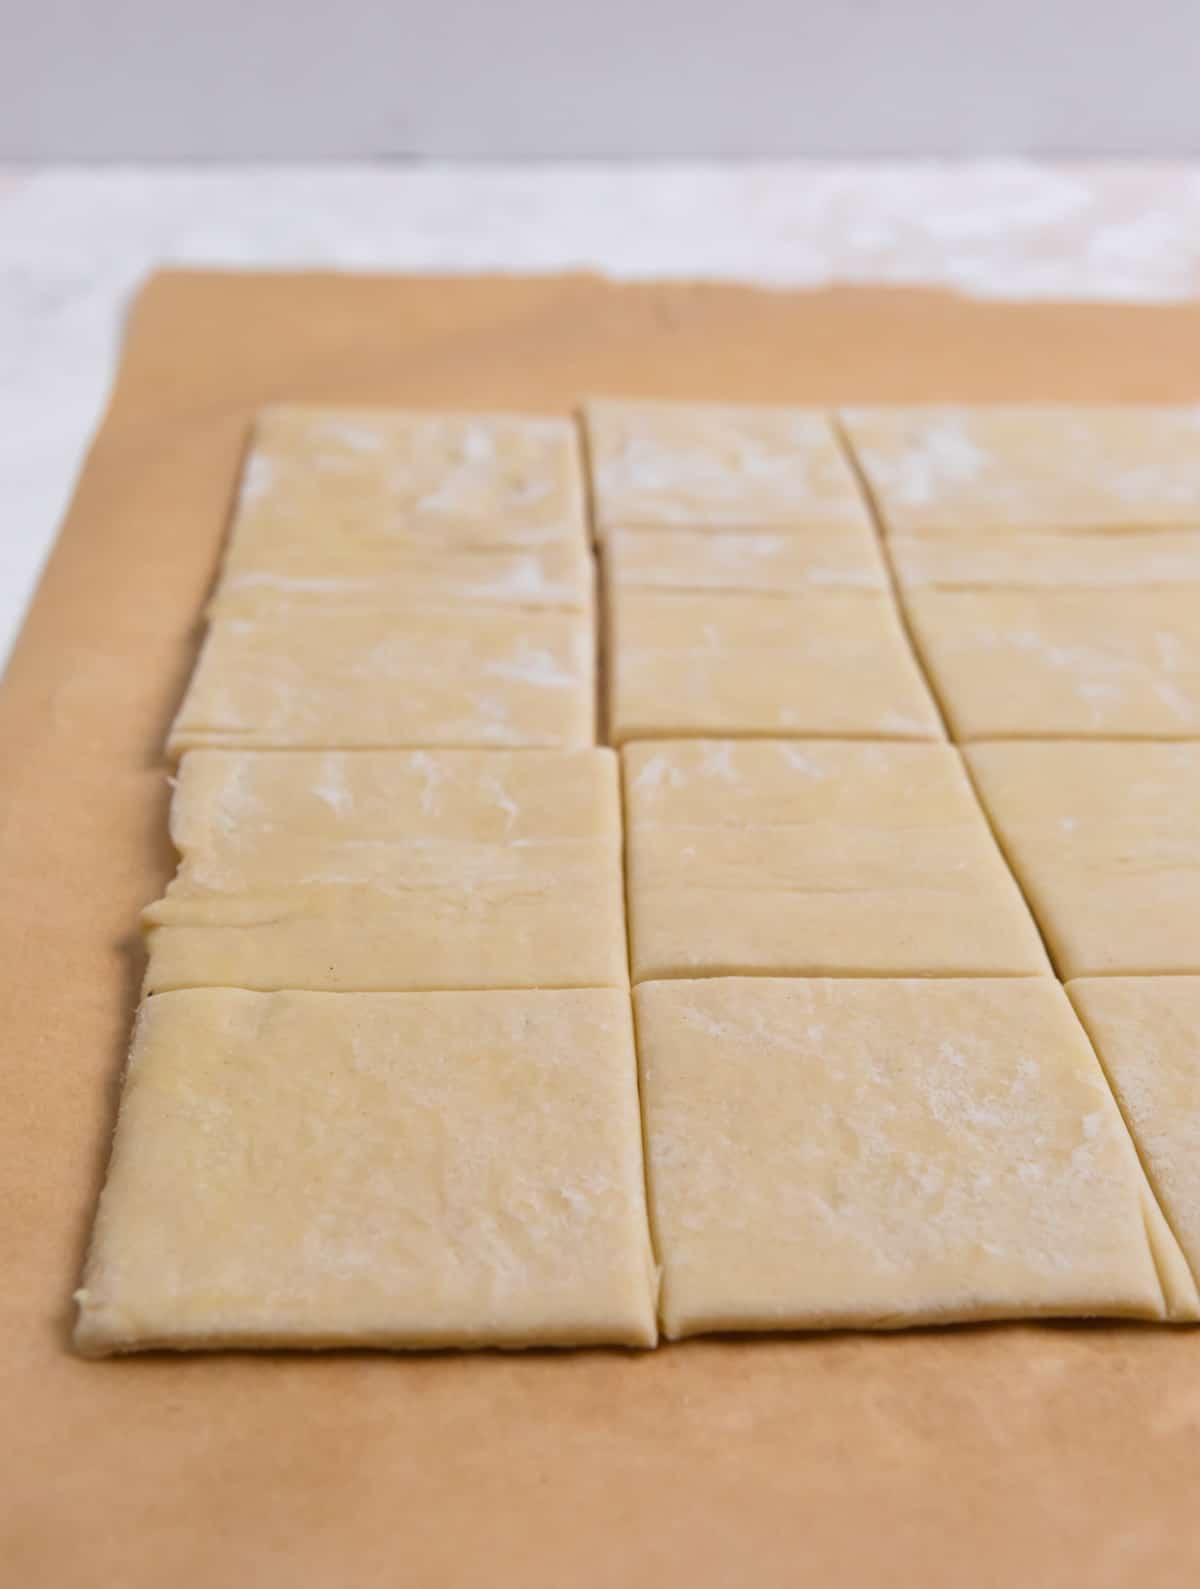 Puff pastry dough on parchment sliced into squares.